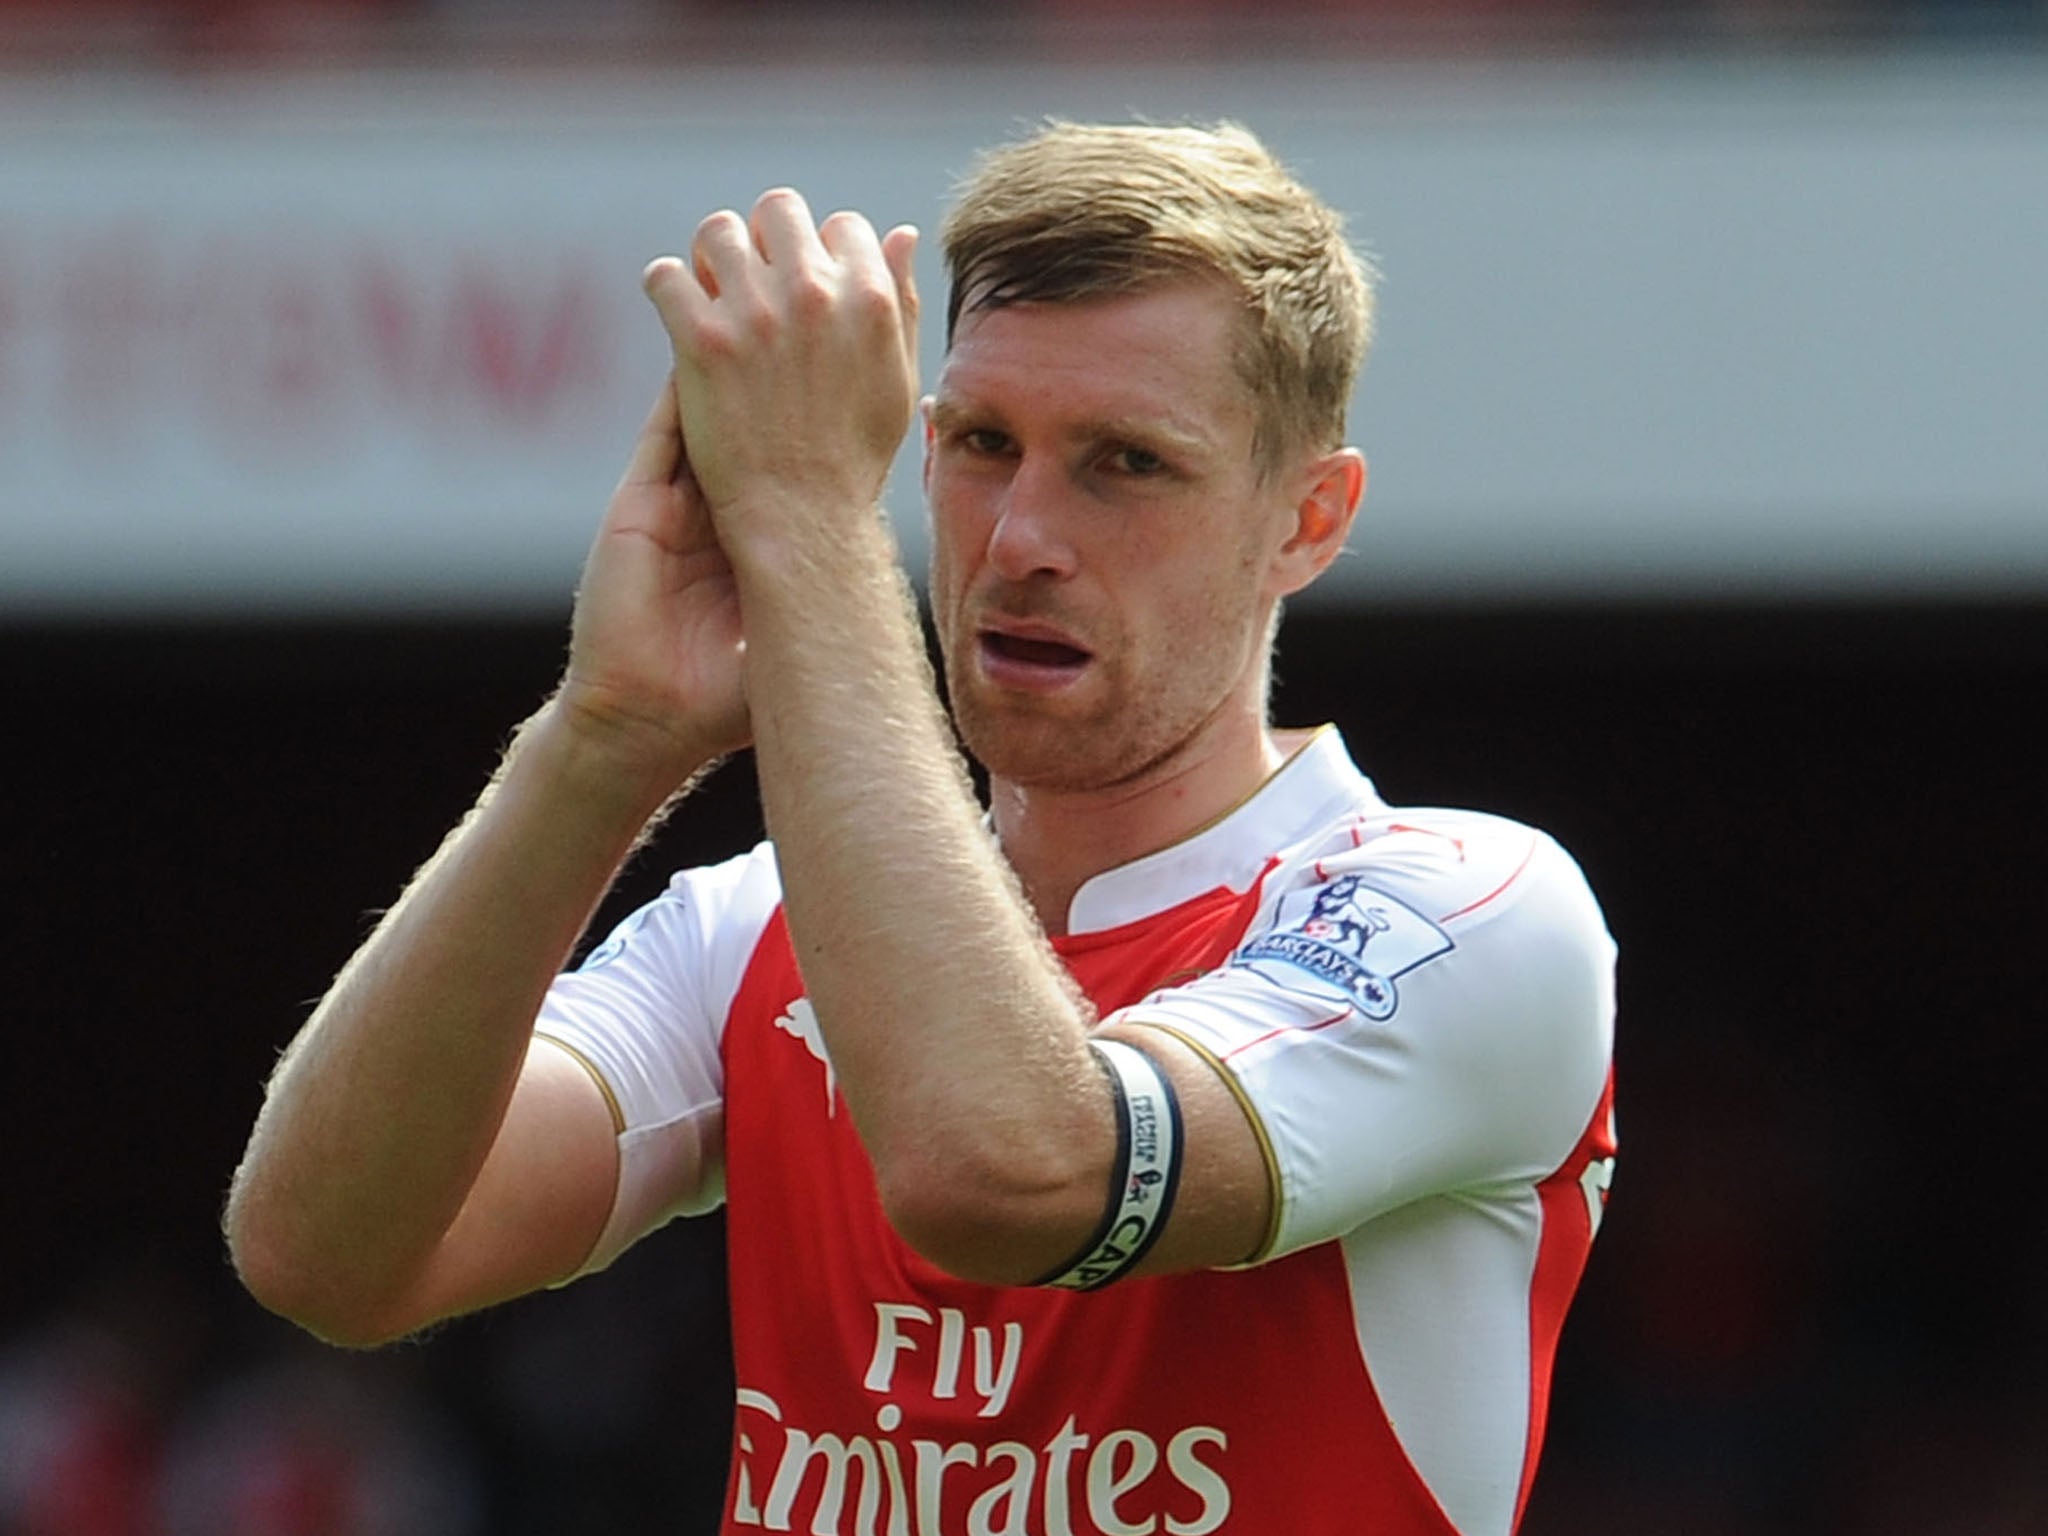 Mertesacker has been out of contention with a virus since mid-August